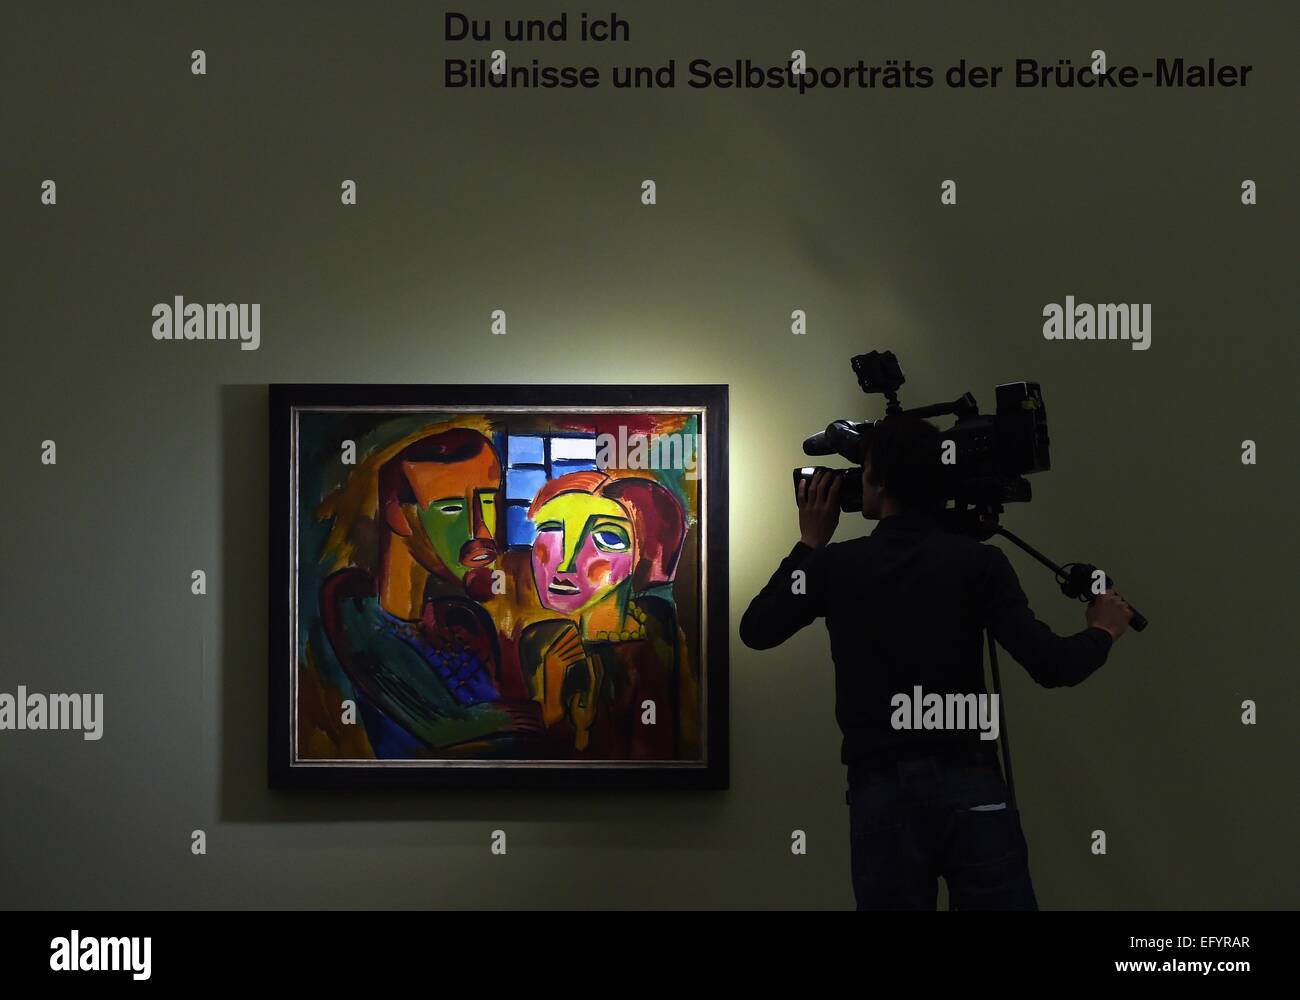 A camera man films the painting 'Du und ich' (you and me) from 1919 by artist Karl Schmidt-Rottluff during a preview tour of the Moritzburg art museum in Halle, Germany, 12 February 2015. The exhibition showcases 70 works of art of various artists of the artist group 'The Bridge'. Photo: Hendrik Schmidt/ZB Stock Photo